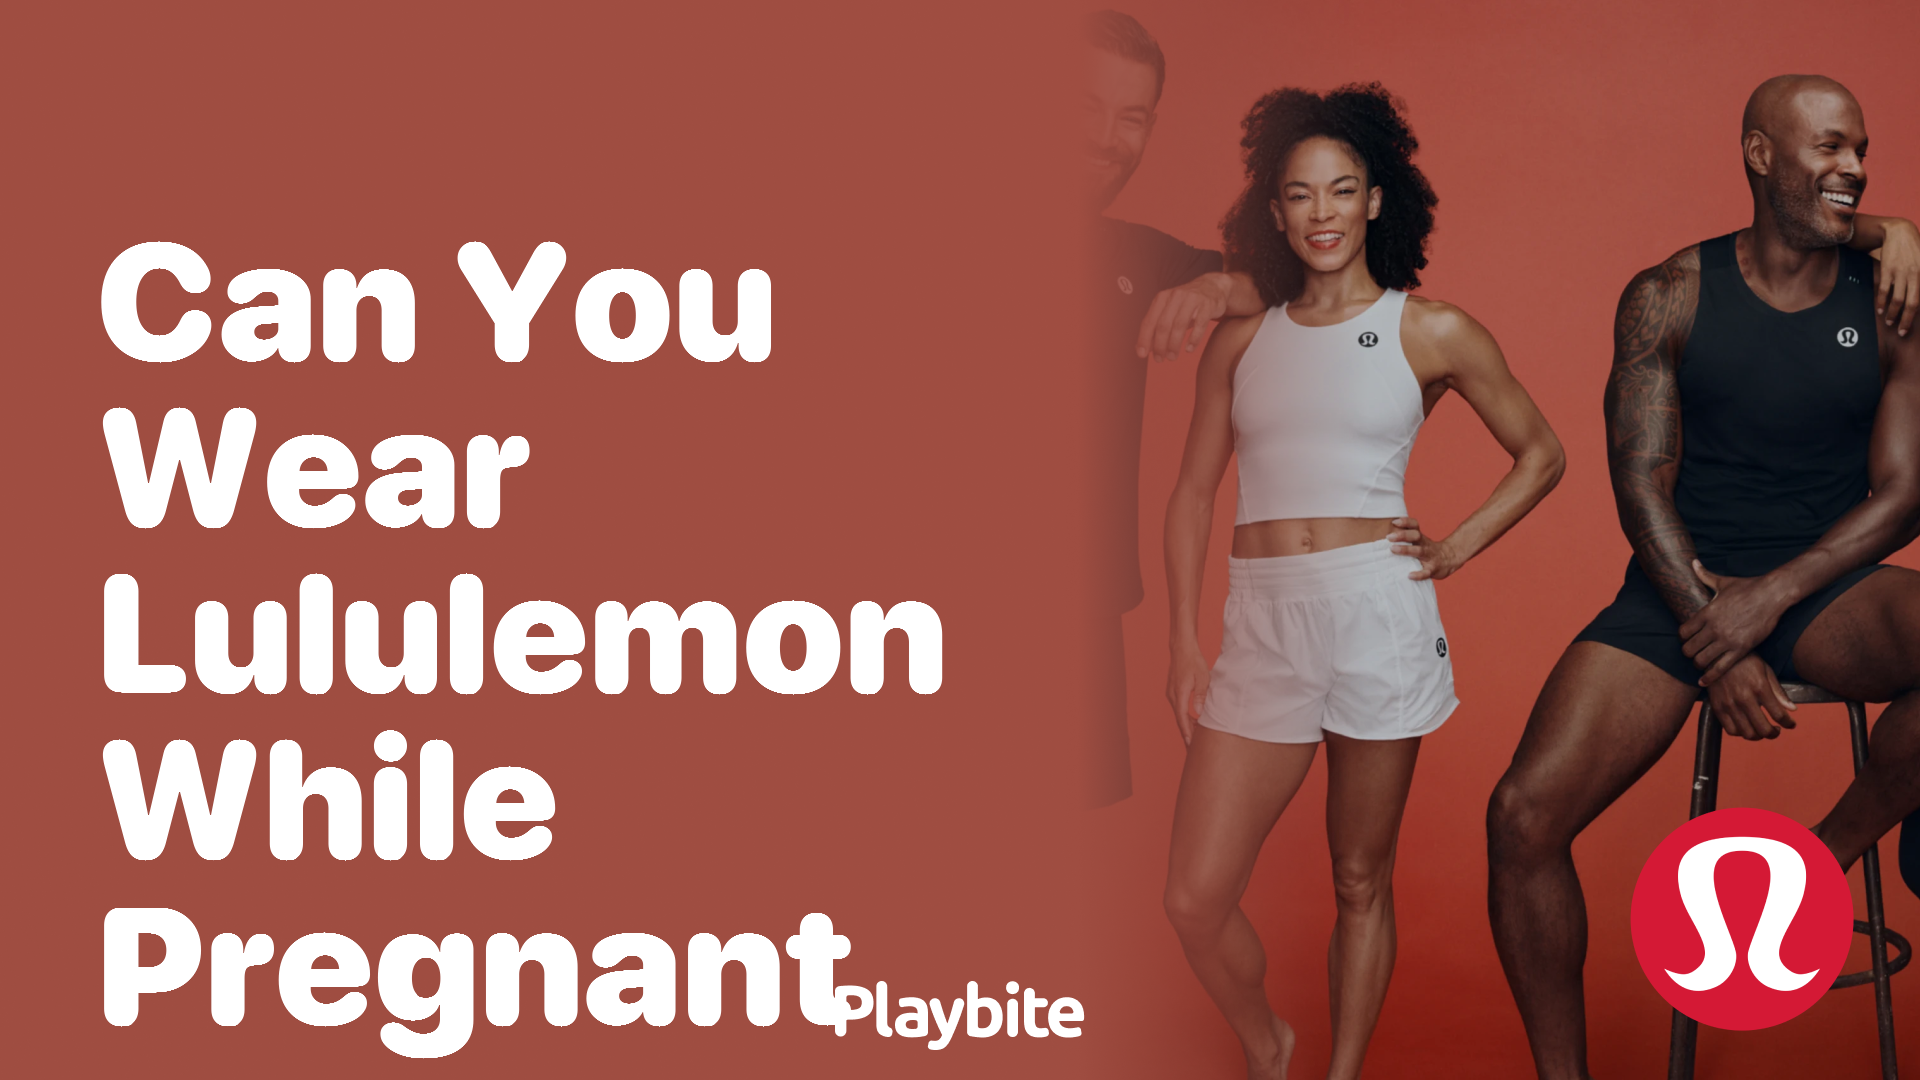 Can You Wear Lululemon While Pregnant? - Playbite